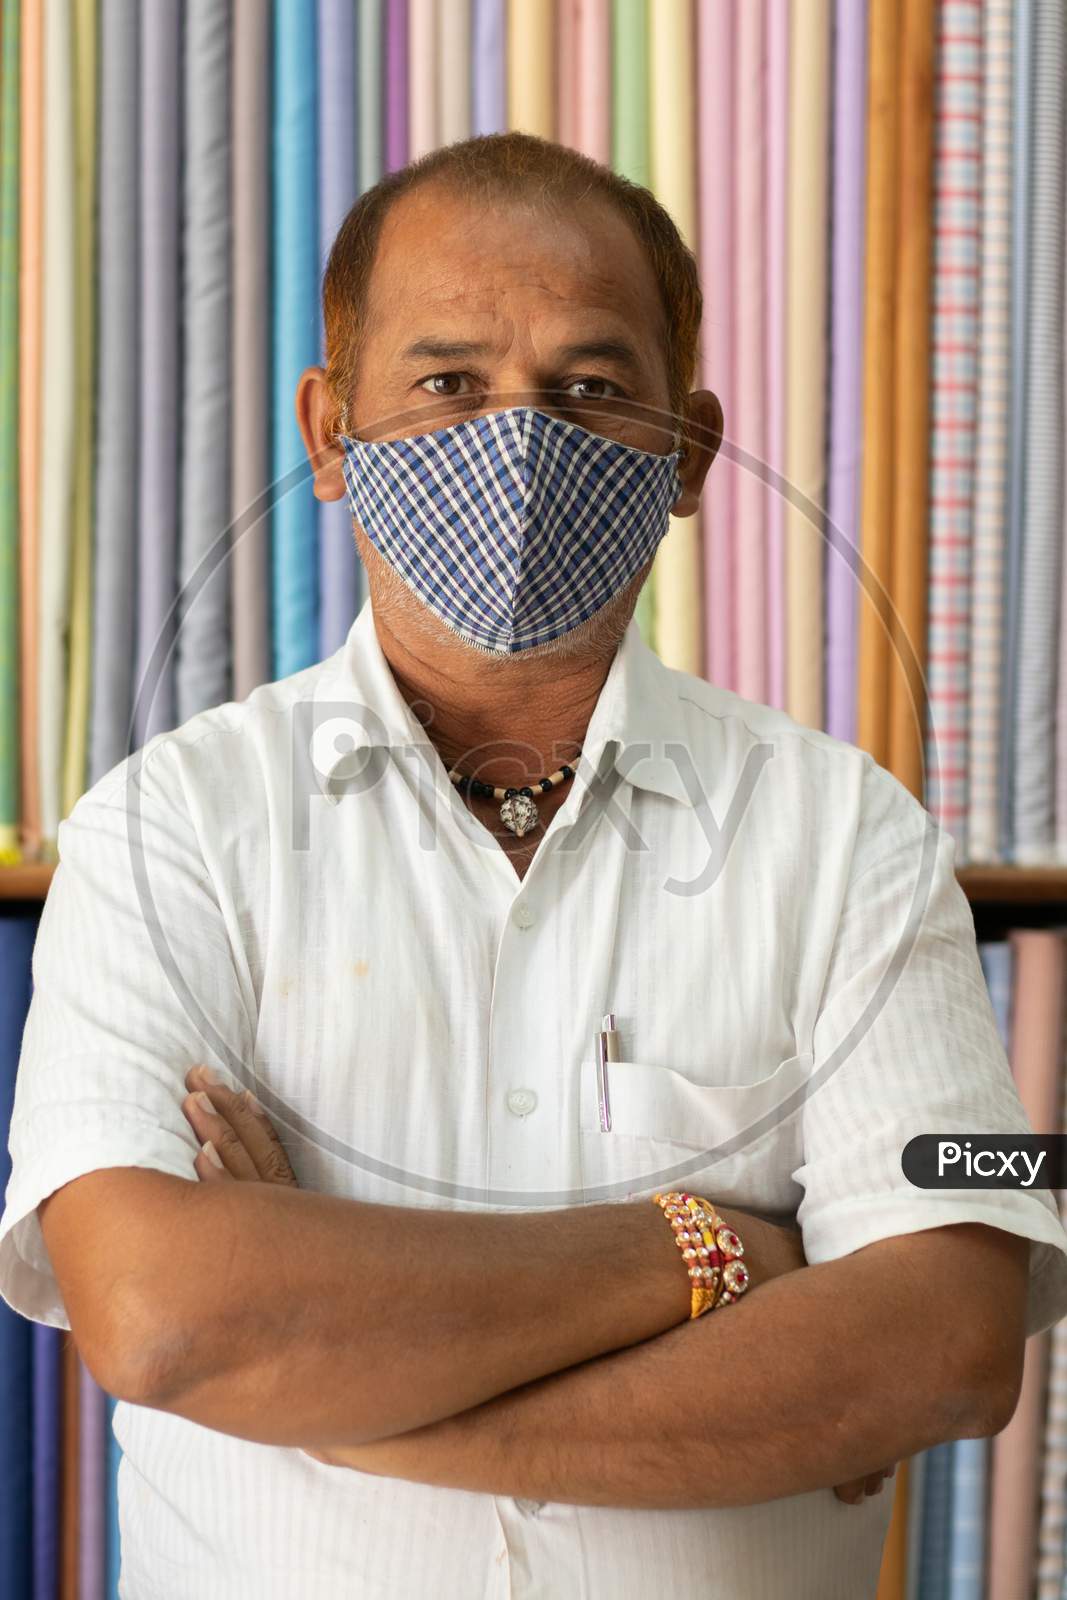 Portrait Of Shopkeeper Looking At Camera In Cloth Store Wearing Protective Medical Mask To Prevent Coronavirus Or Covid-19 And Standing With Arms Crossed